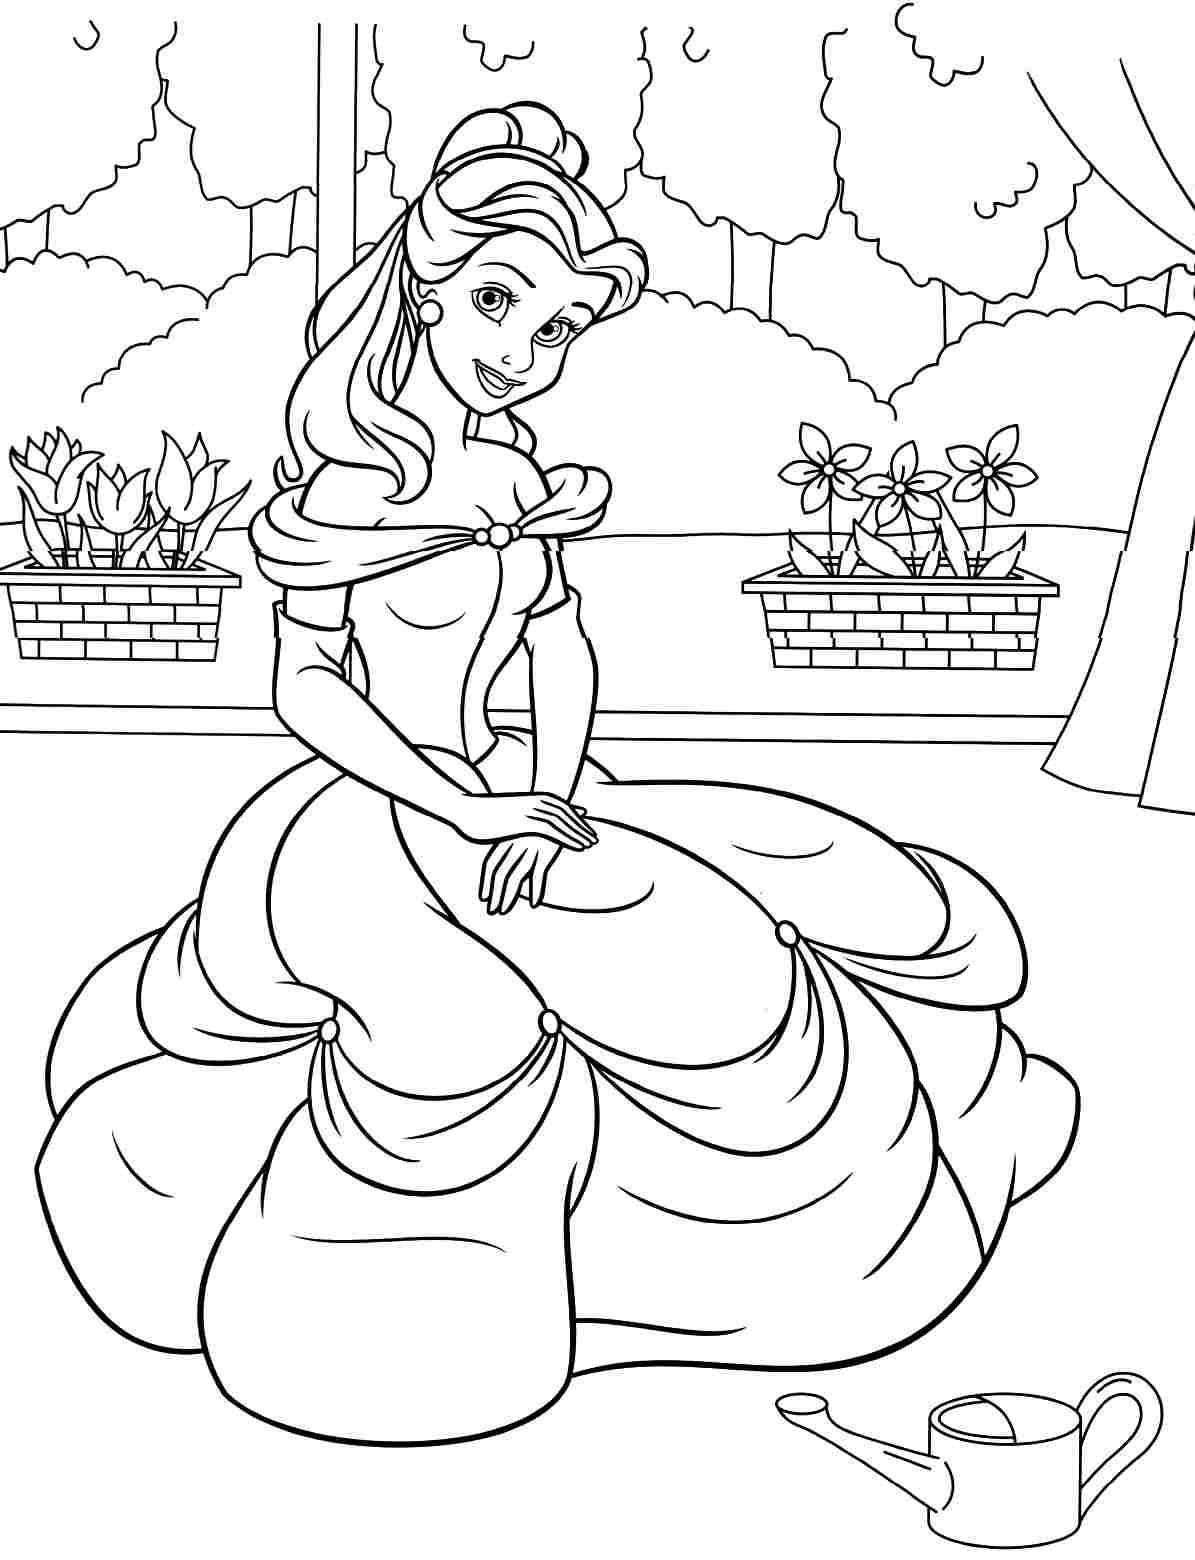 Swiss-sharepoint: Free Printable Coloring Pages Disney